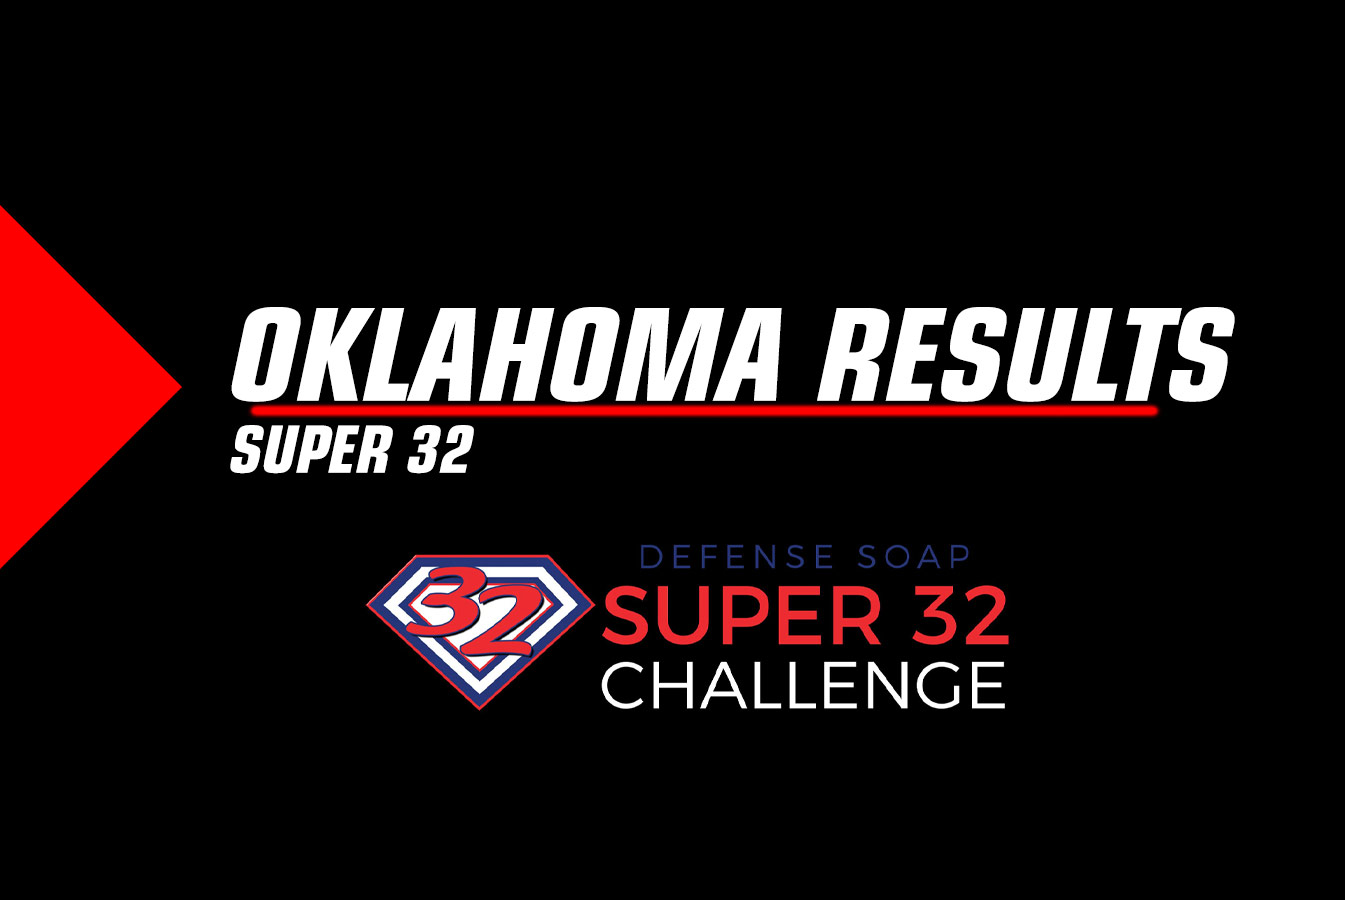 Oklahoma placers at Super32 Owrestle